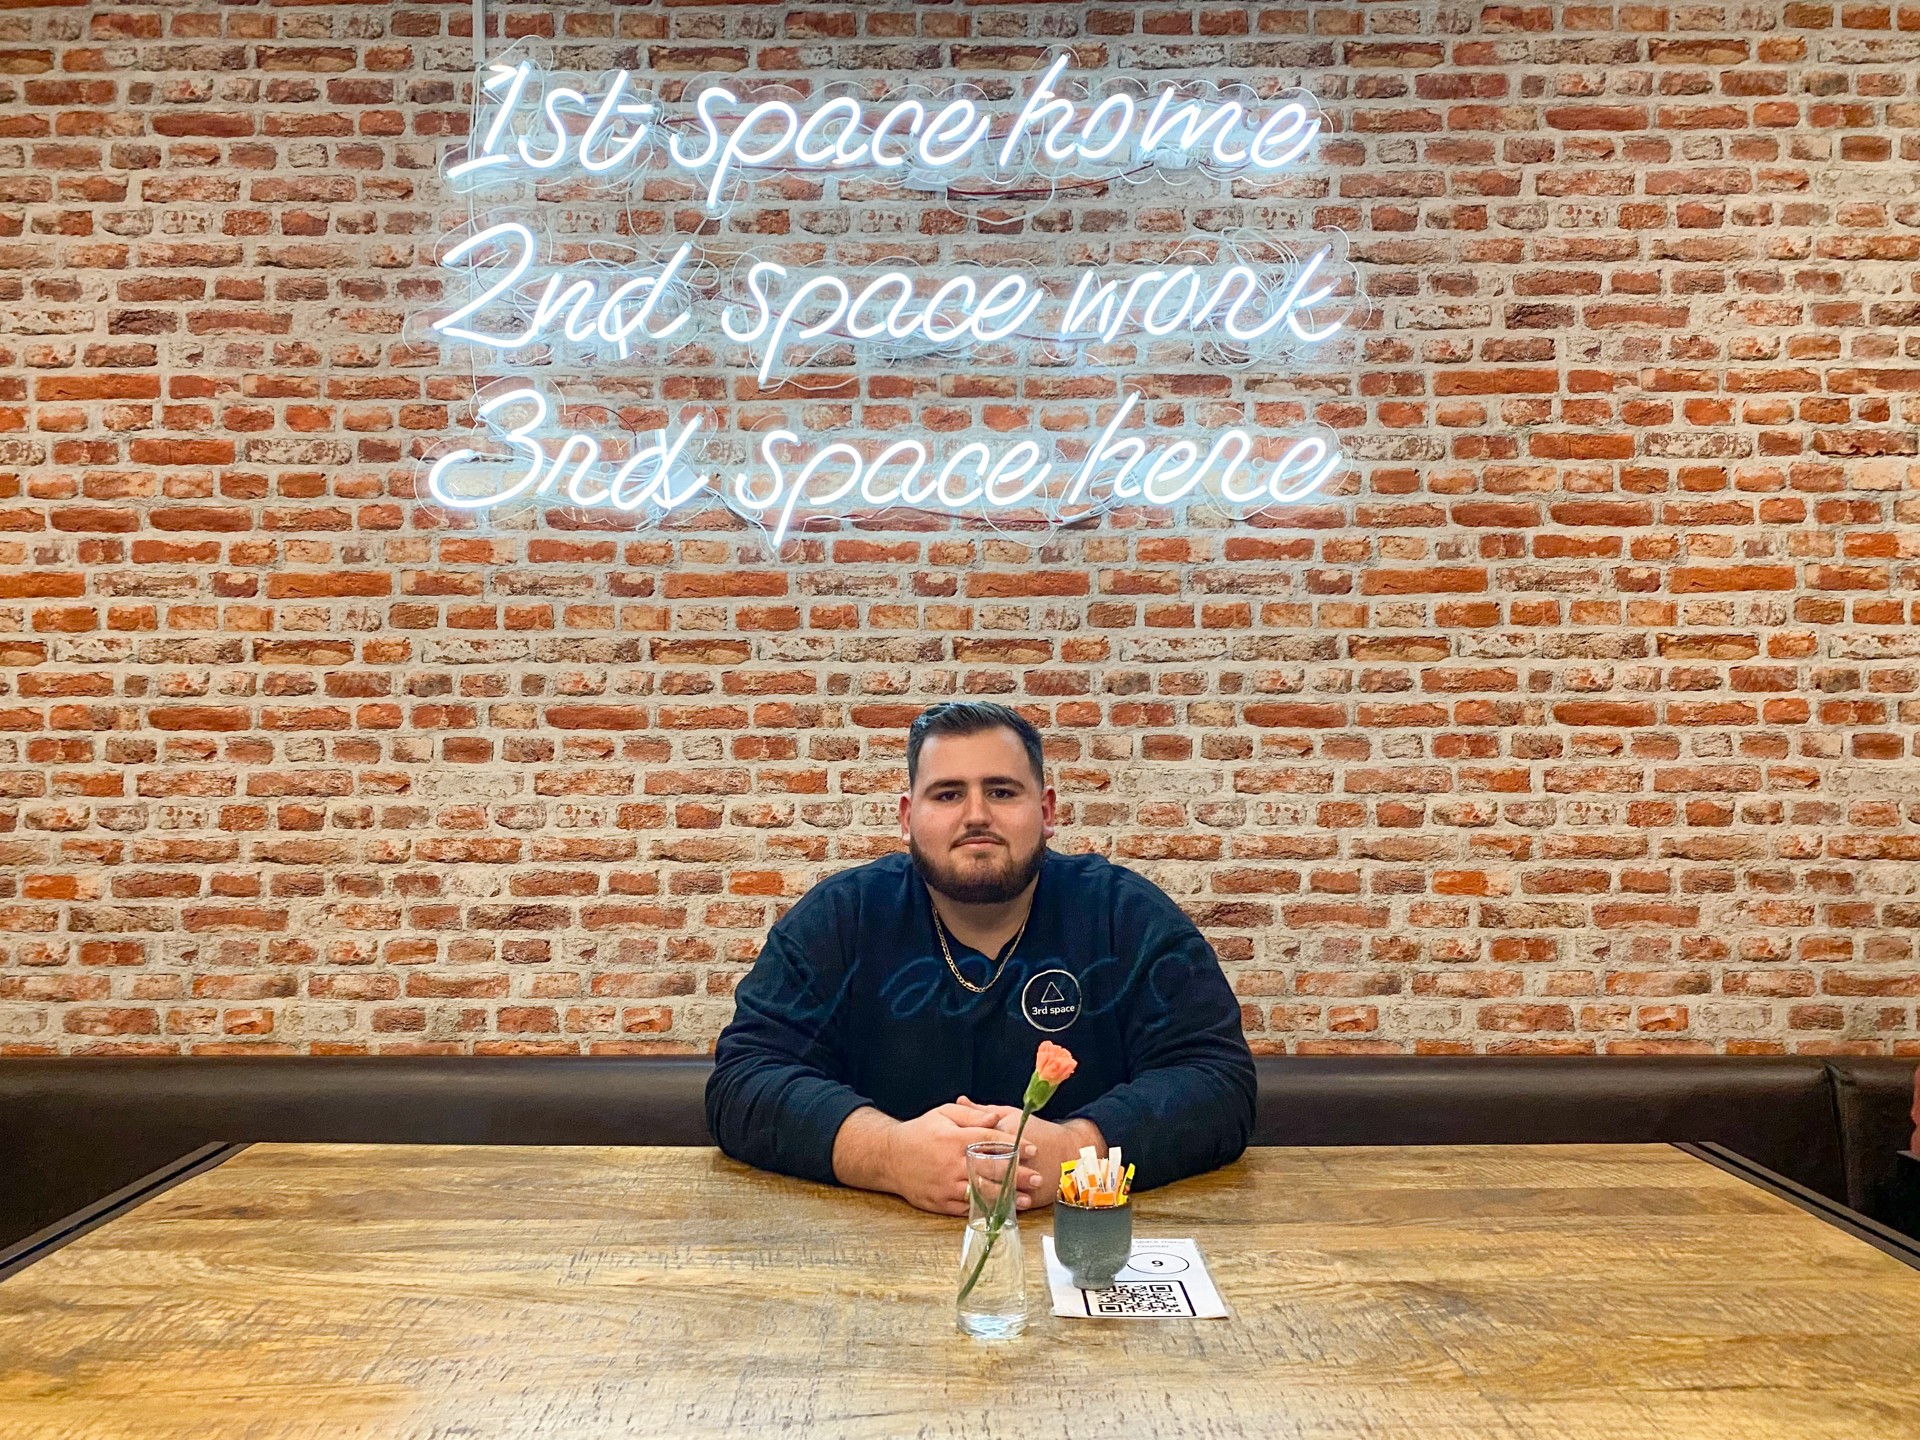 Five minutes with Nic Nocera, 3rd Space Canberra